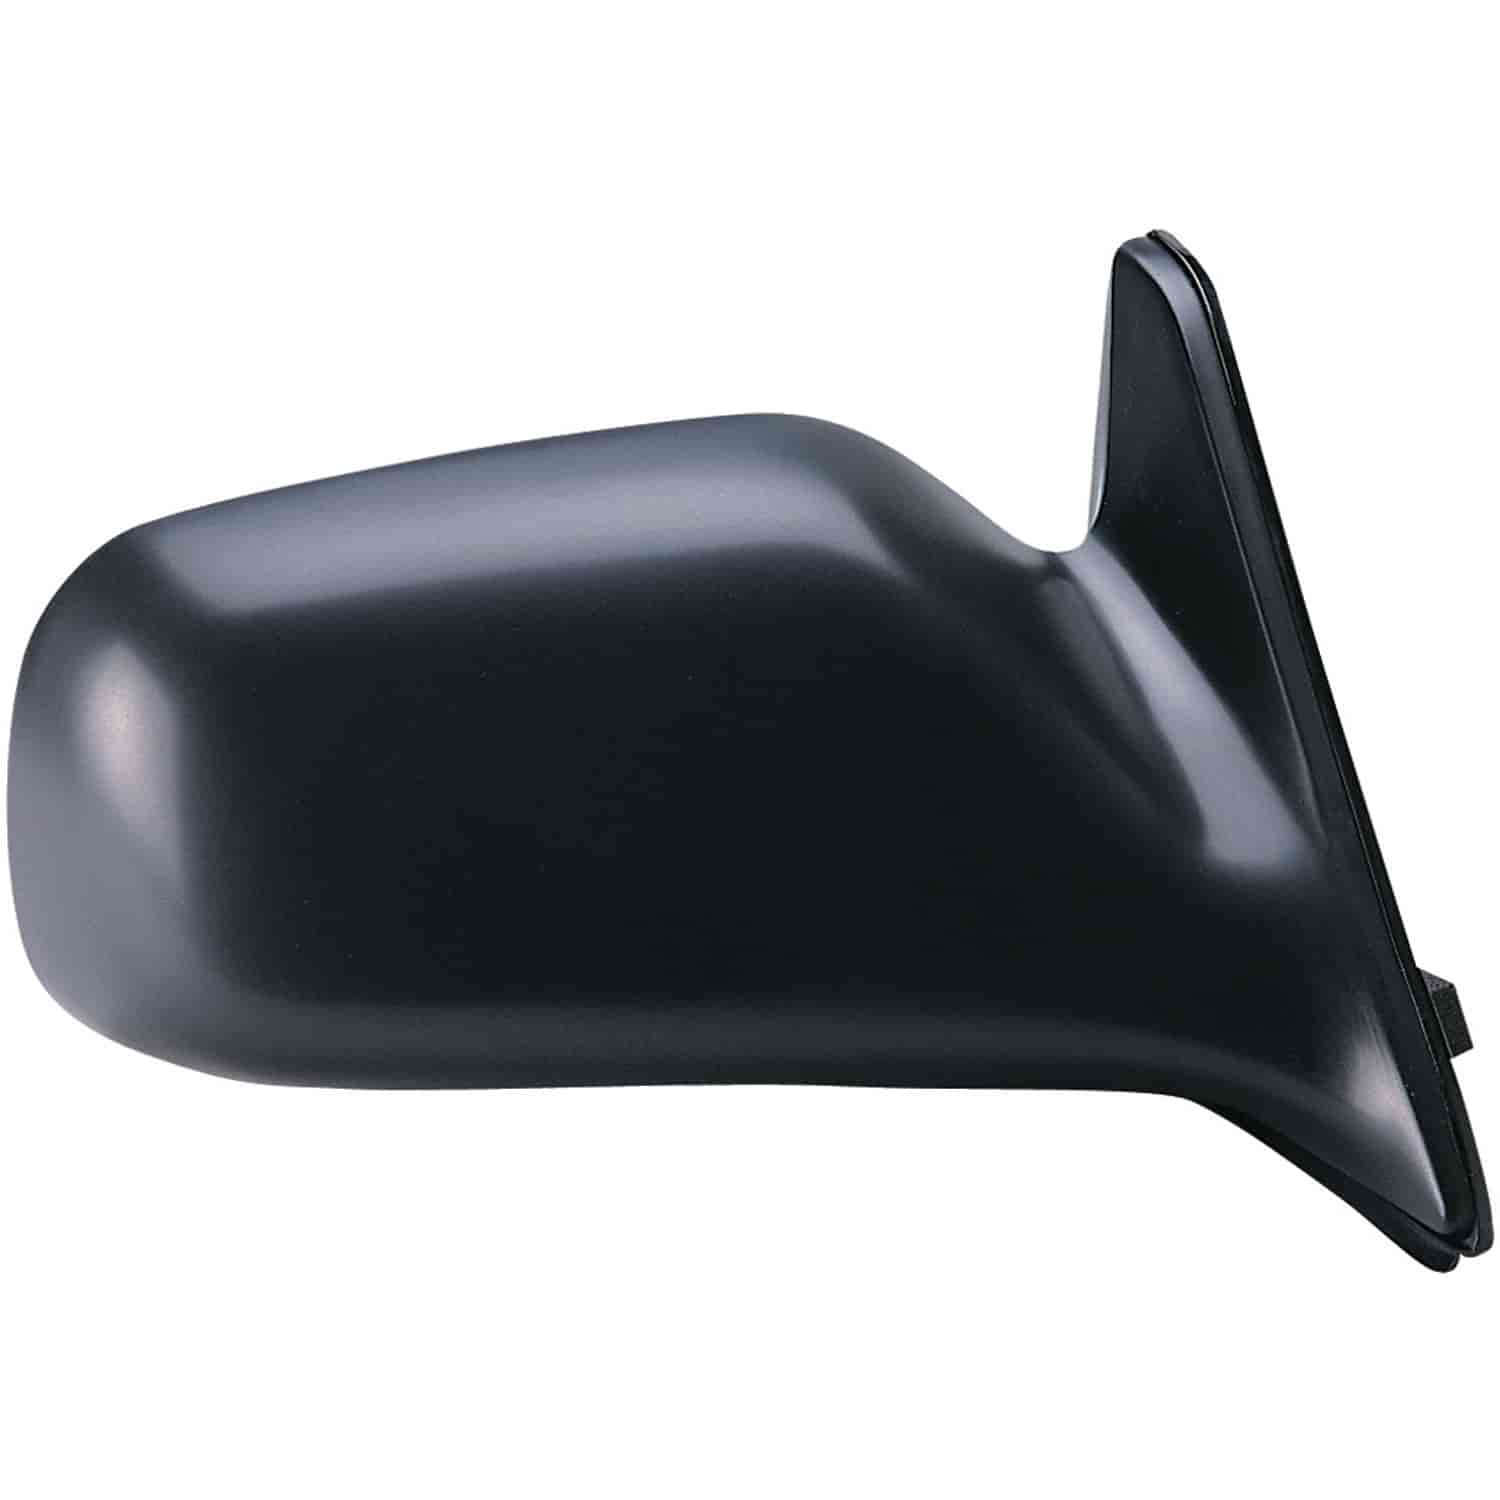 OEM Style Replacement mirror for 88-93 Toyota Corolla Sedan/ Wagon passenger side mirror tested to f